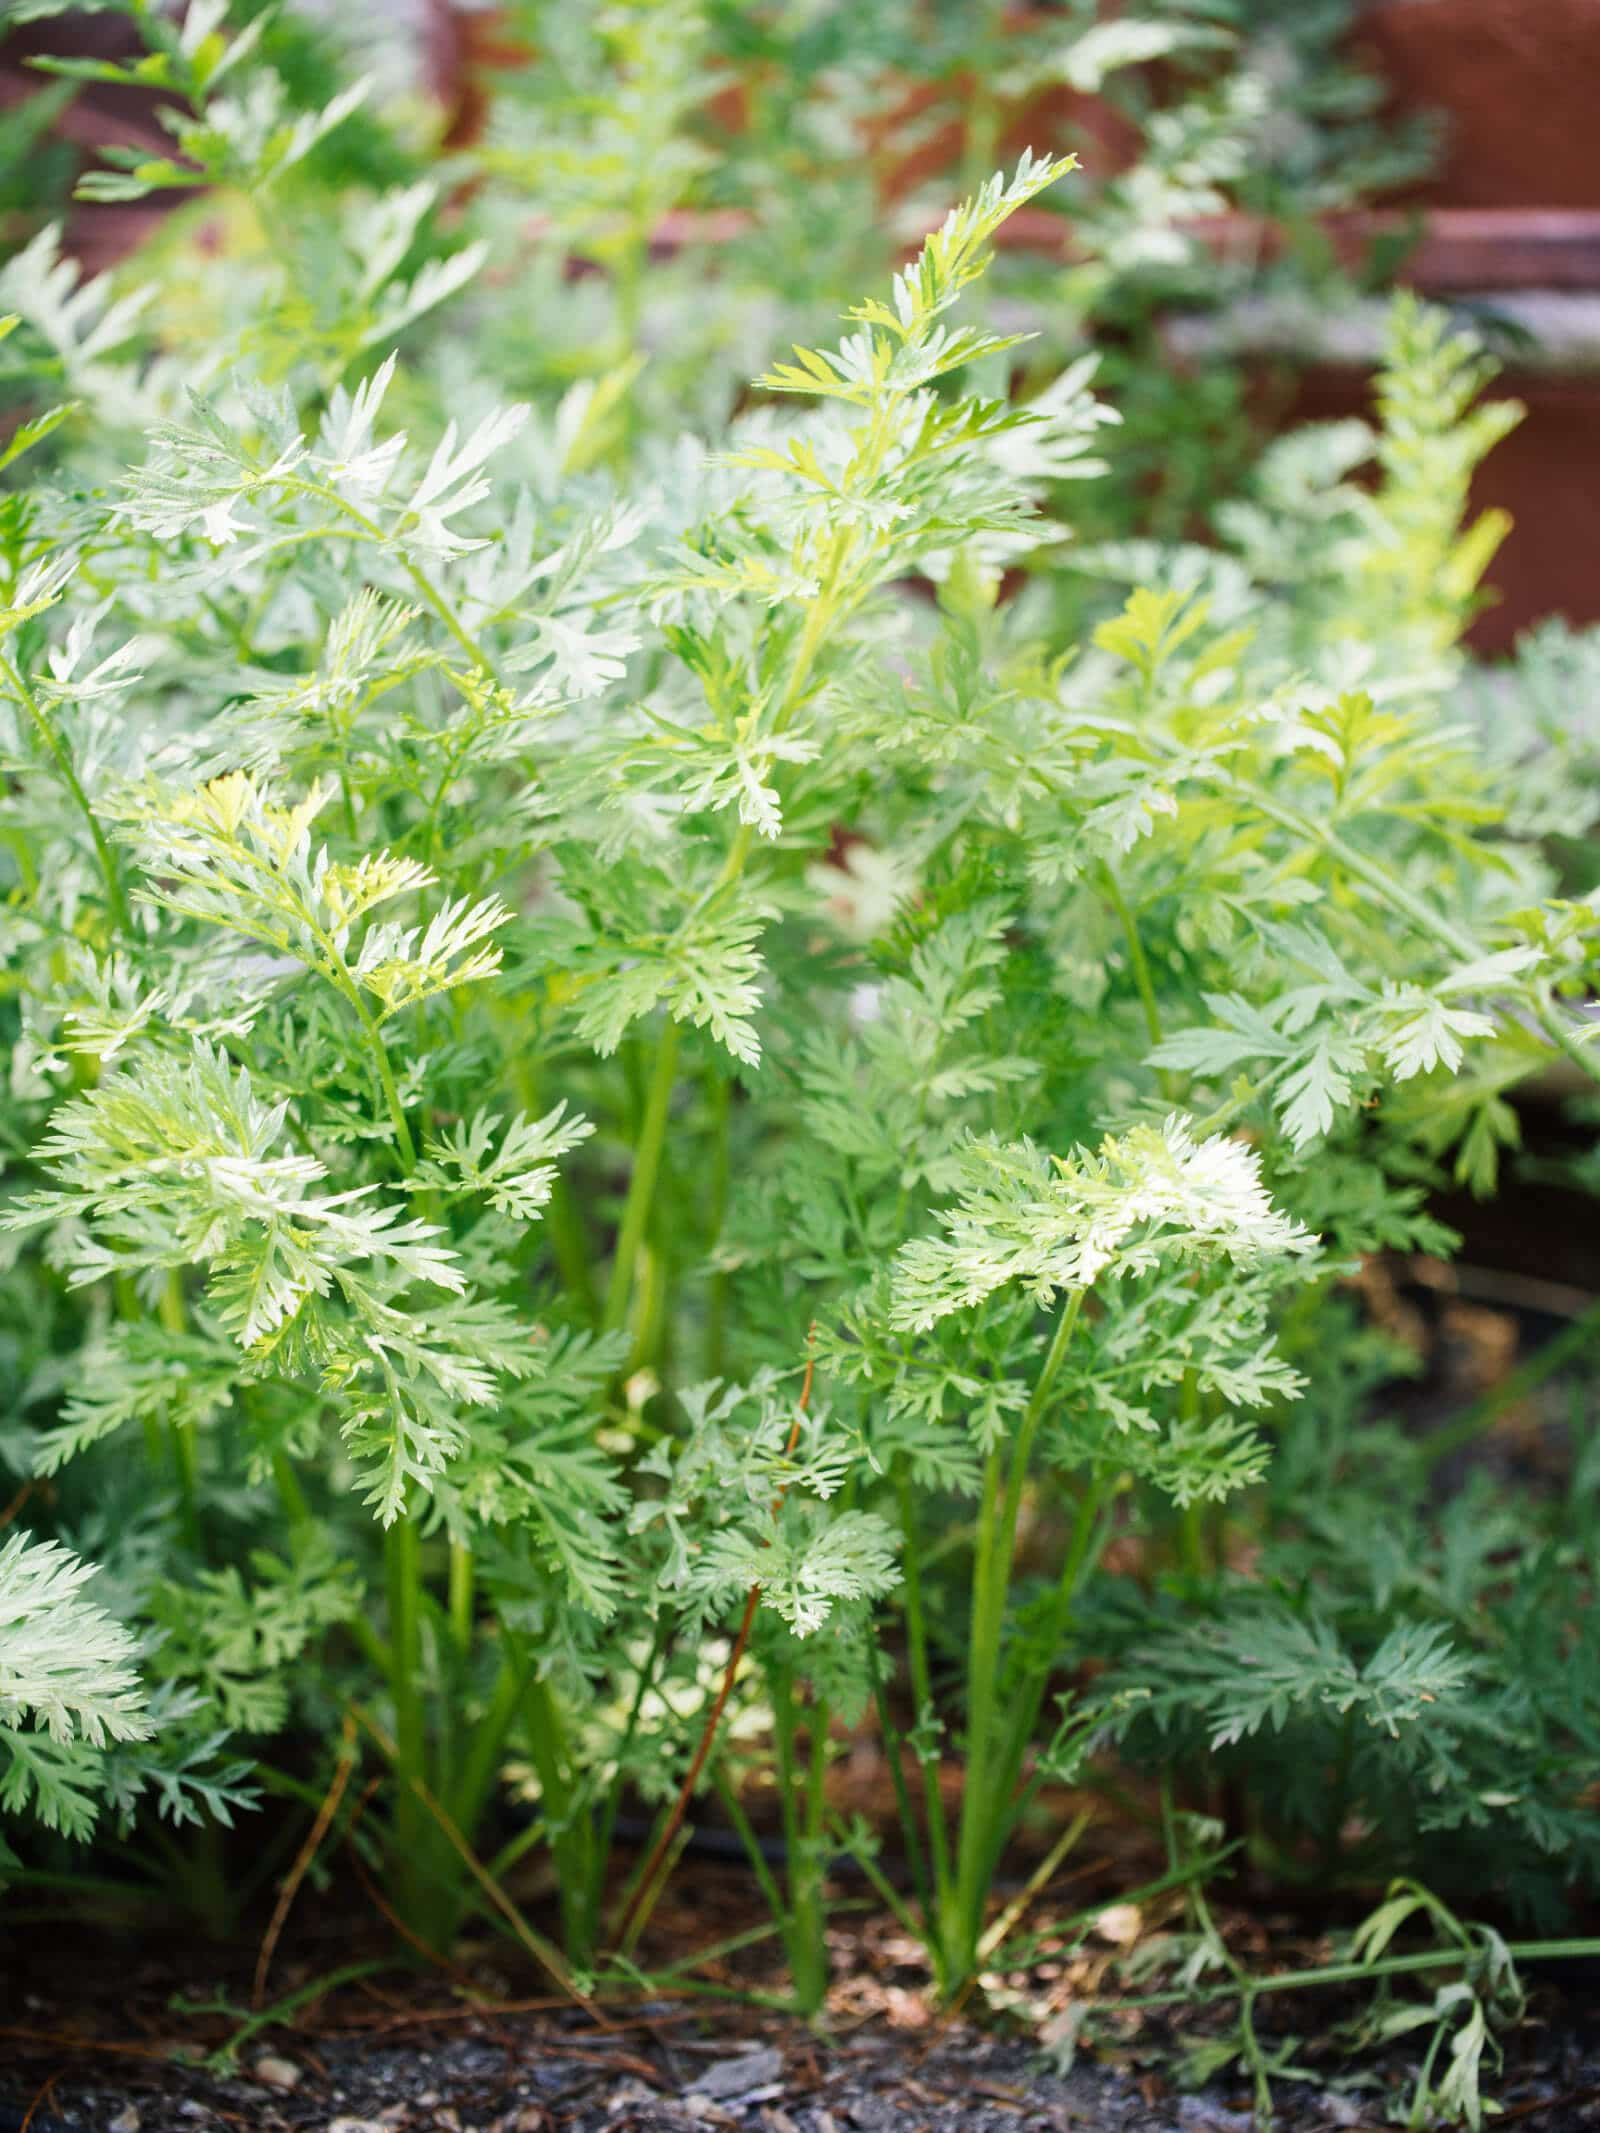 Carrot tops are not poisonous